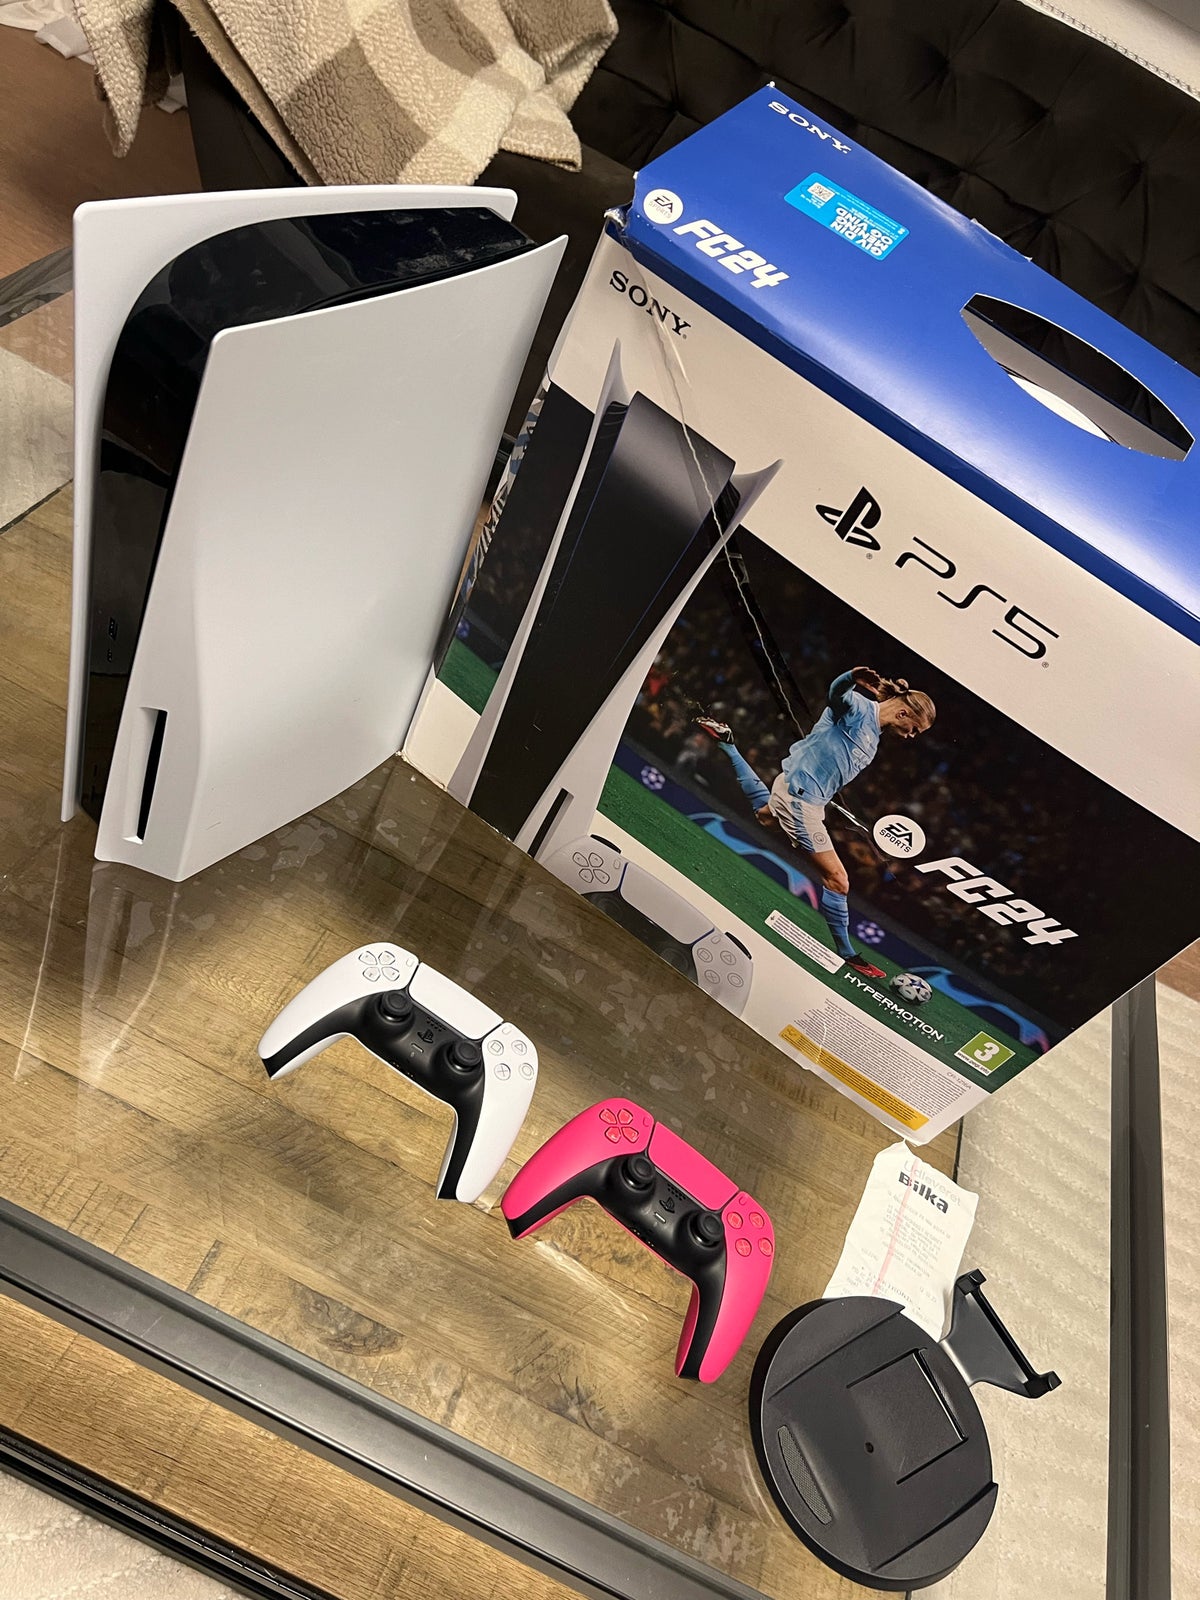 Ps5 disk, PS5